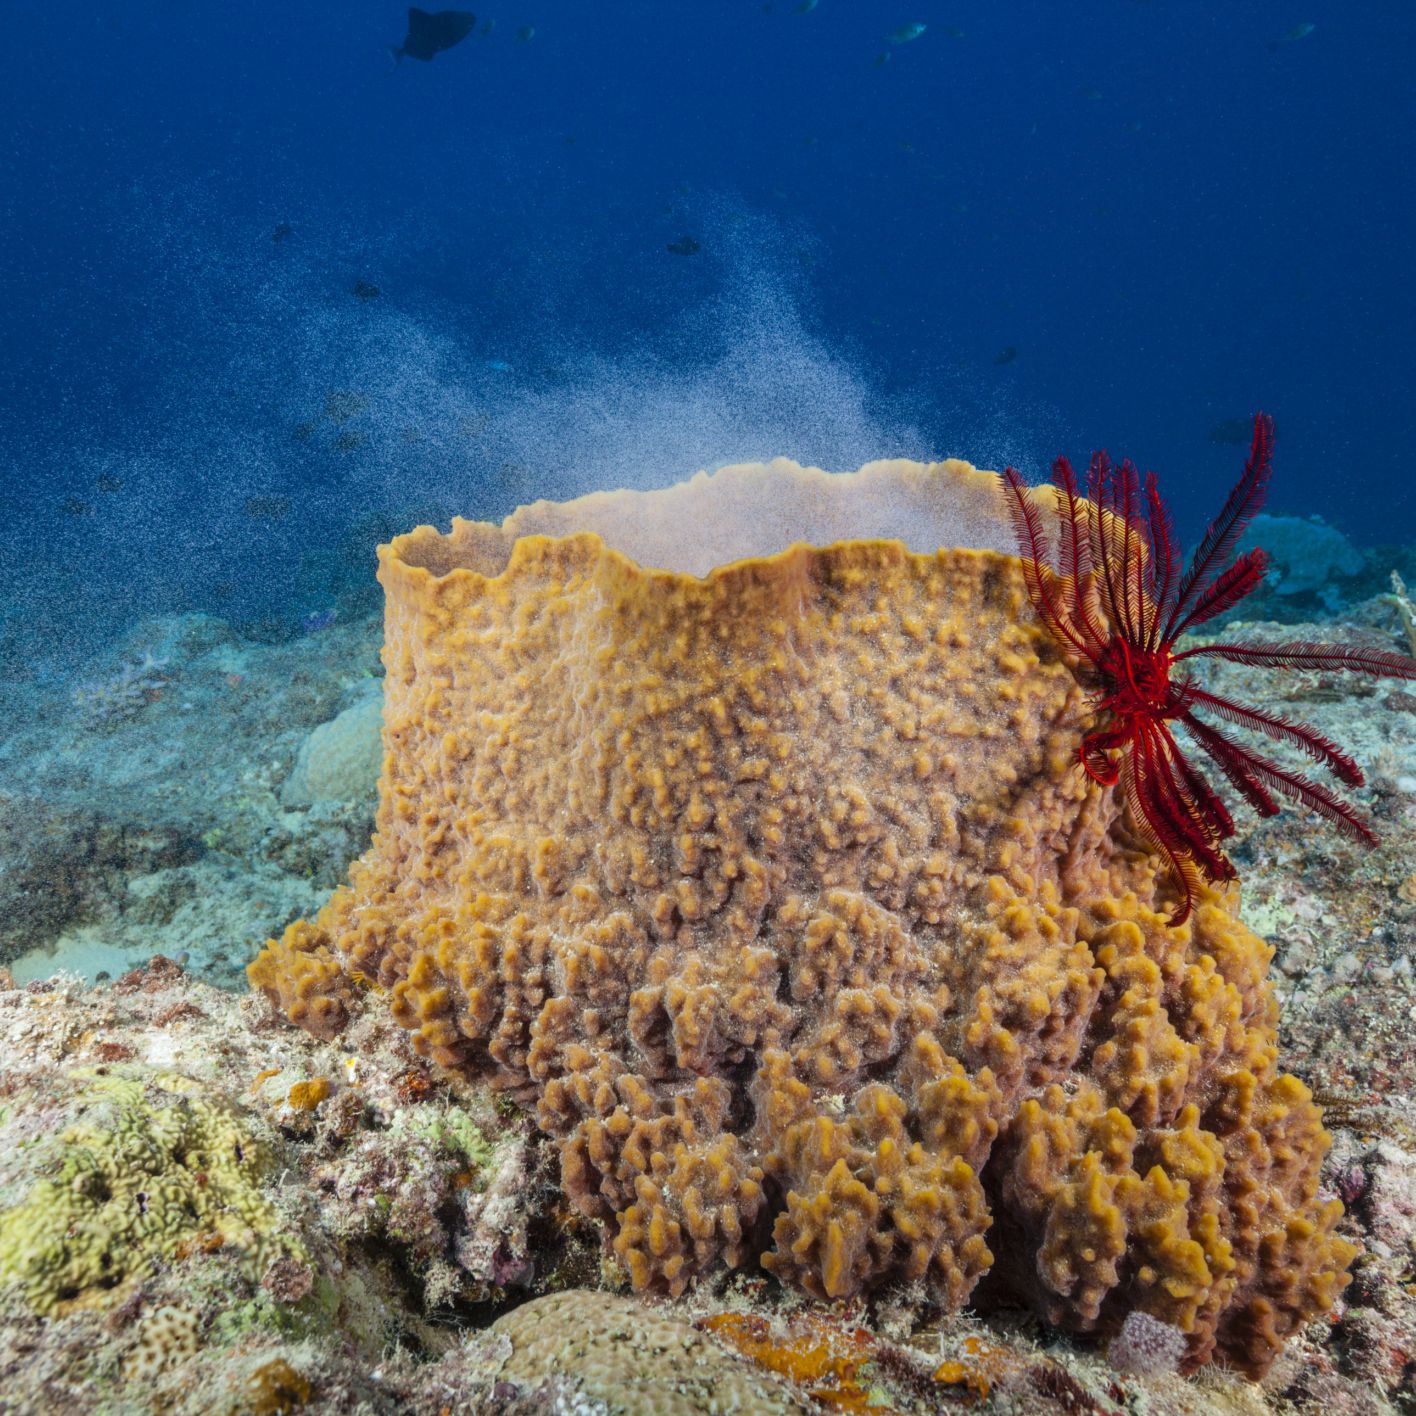 Where do you find sponges in the ocean?